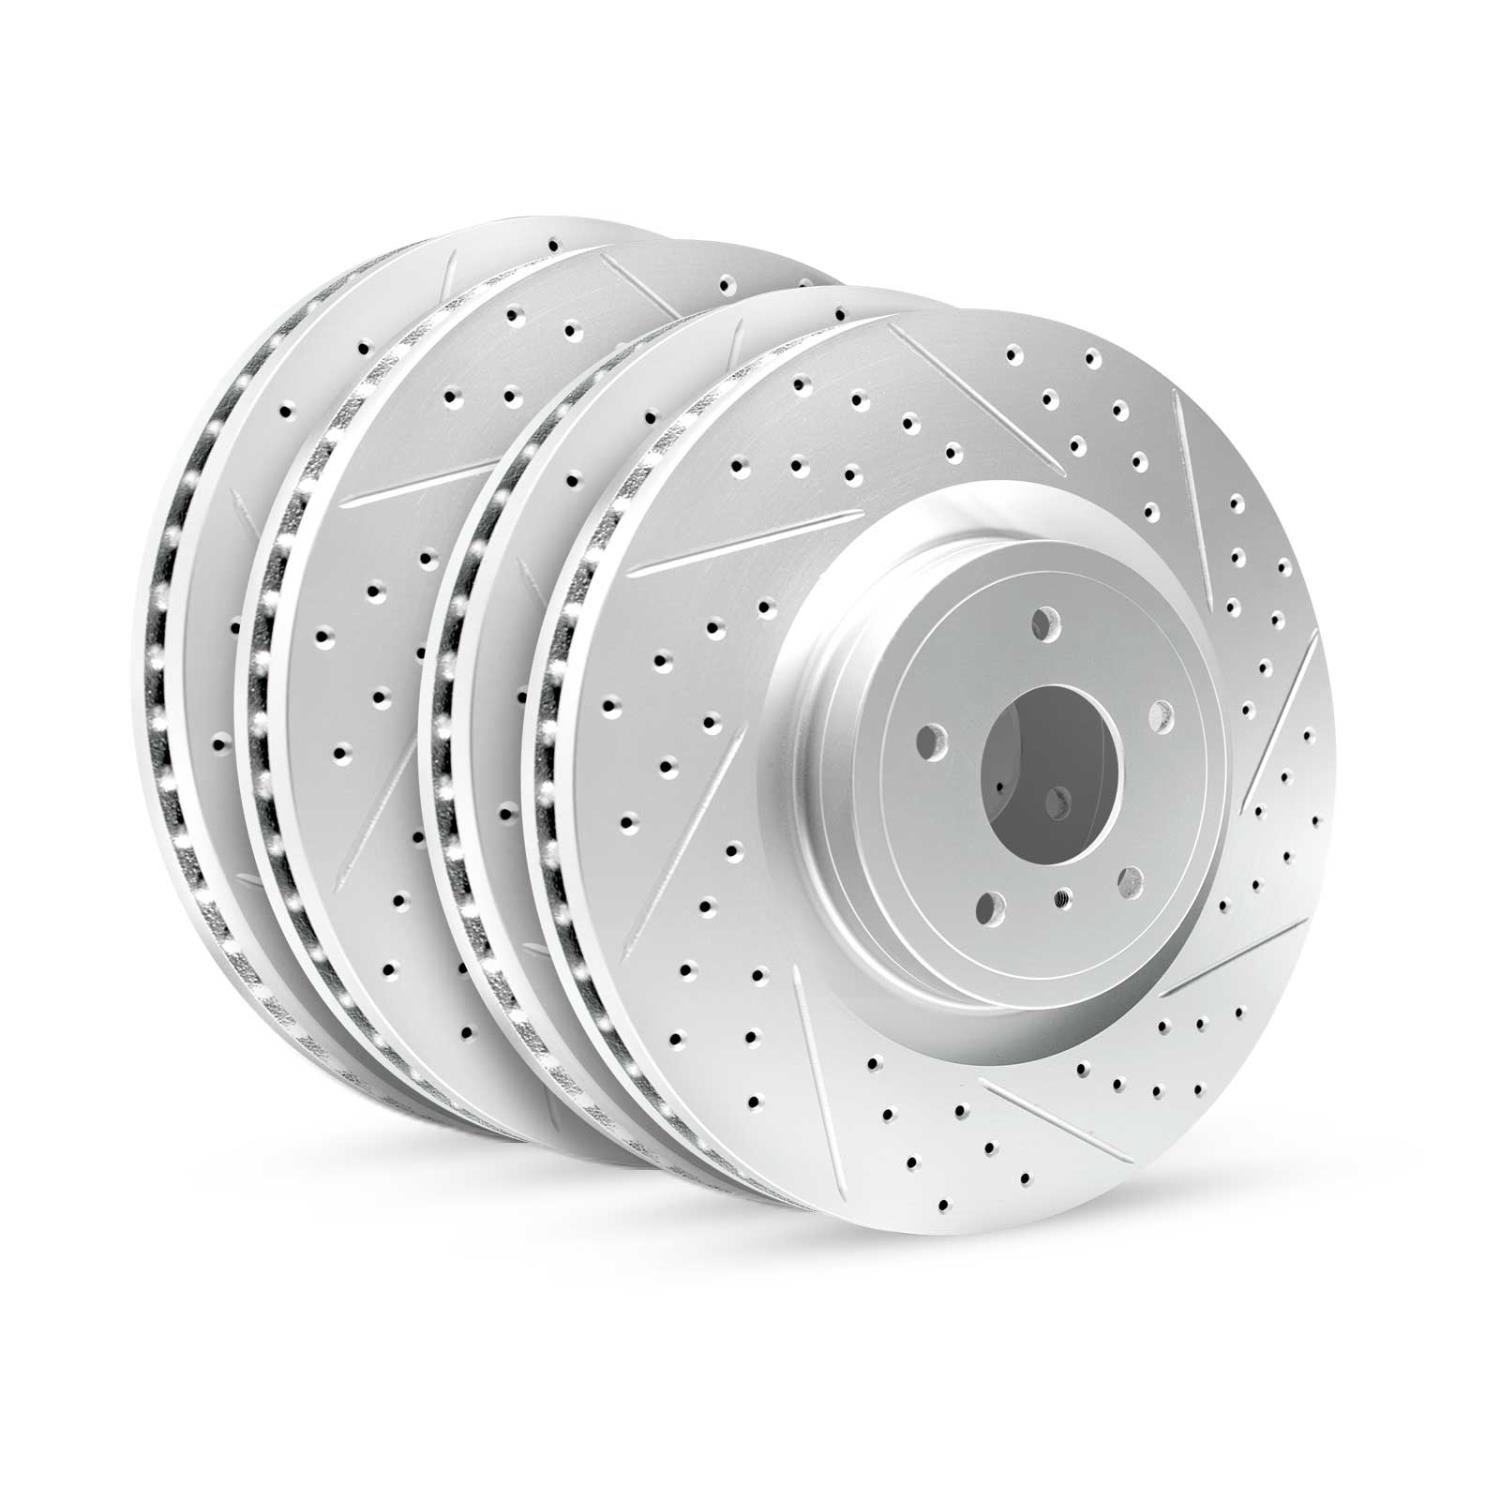 GEO-Carbon Drilled/Slotted Rotors, 2006-2010 BMW, Position: Front/Rear